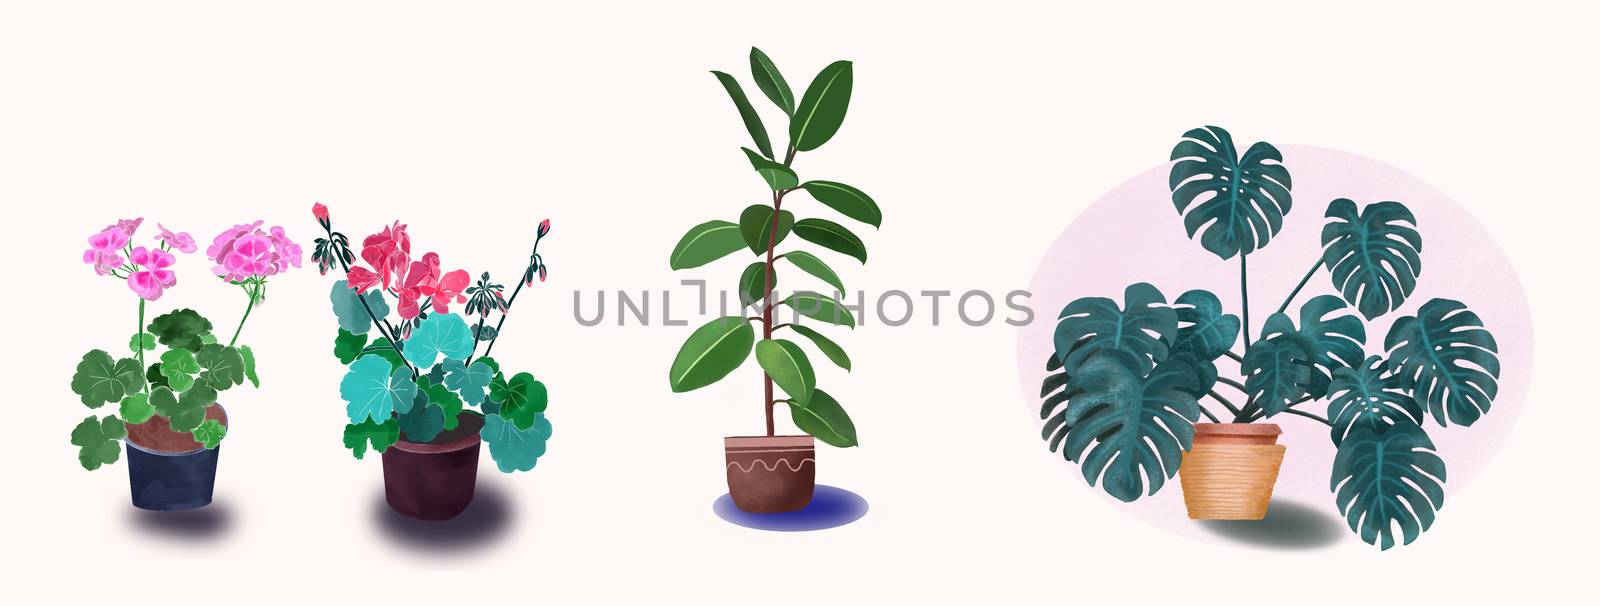 Hand drawn potted houseplant Set of isolated geraniums, ficus and monstera. House Plants Illustration with Monstera, Rubber Plant, and geranium illustration Interior design element.  